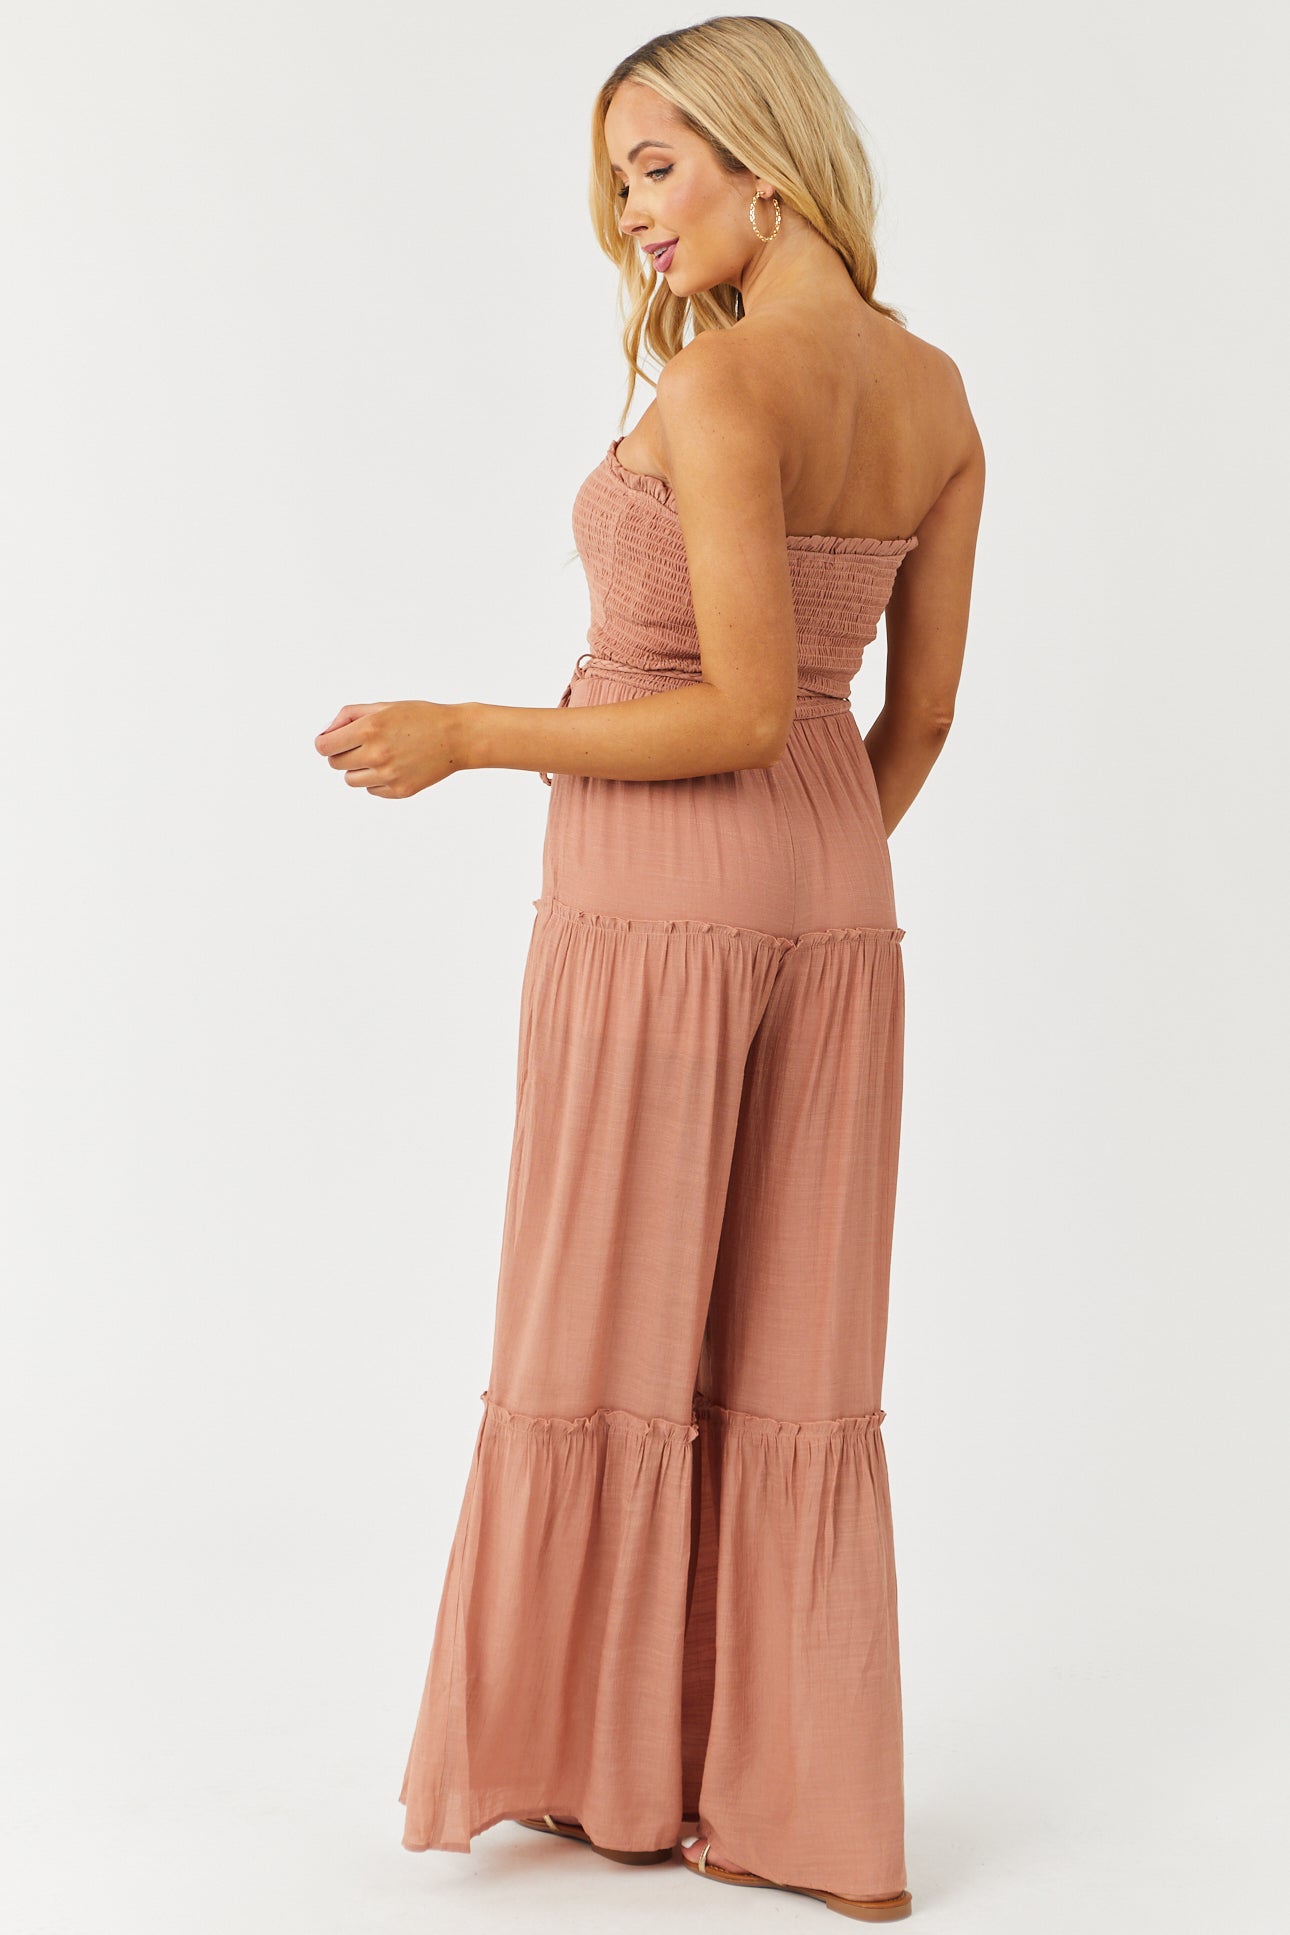 Chestnut Strapless Smocked Jumpsuit with Tie Detail